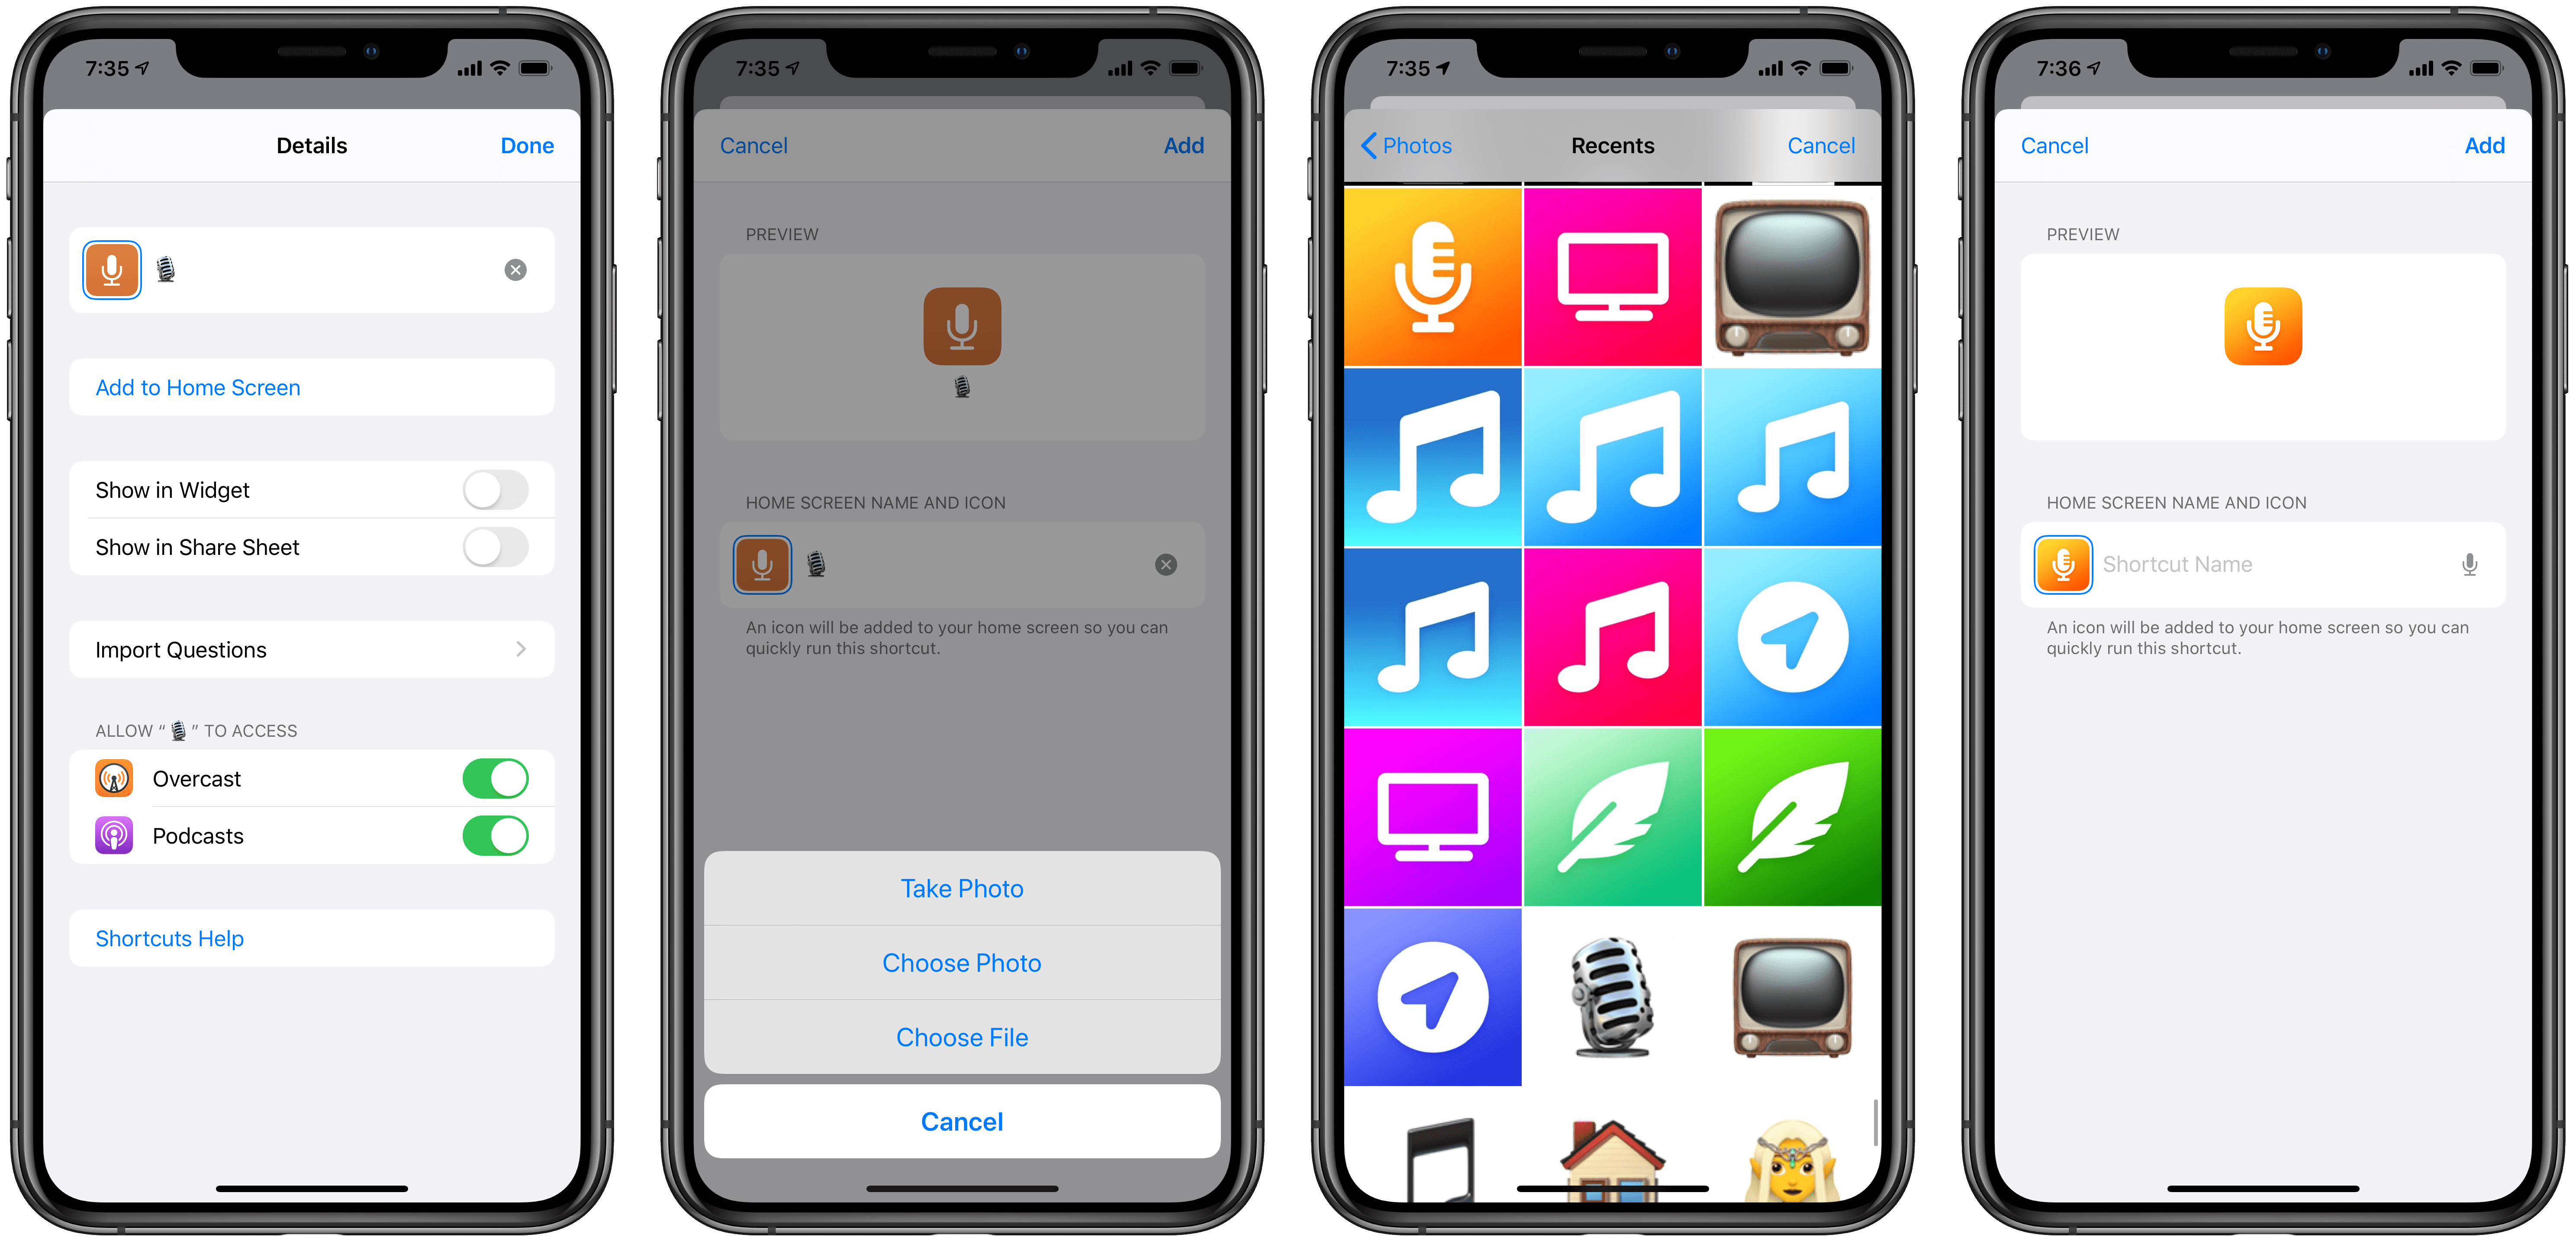 You can choose custom images for shortcuts added to the Home screen.